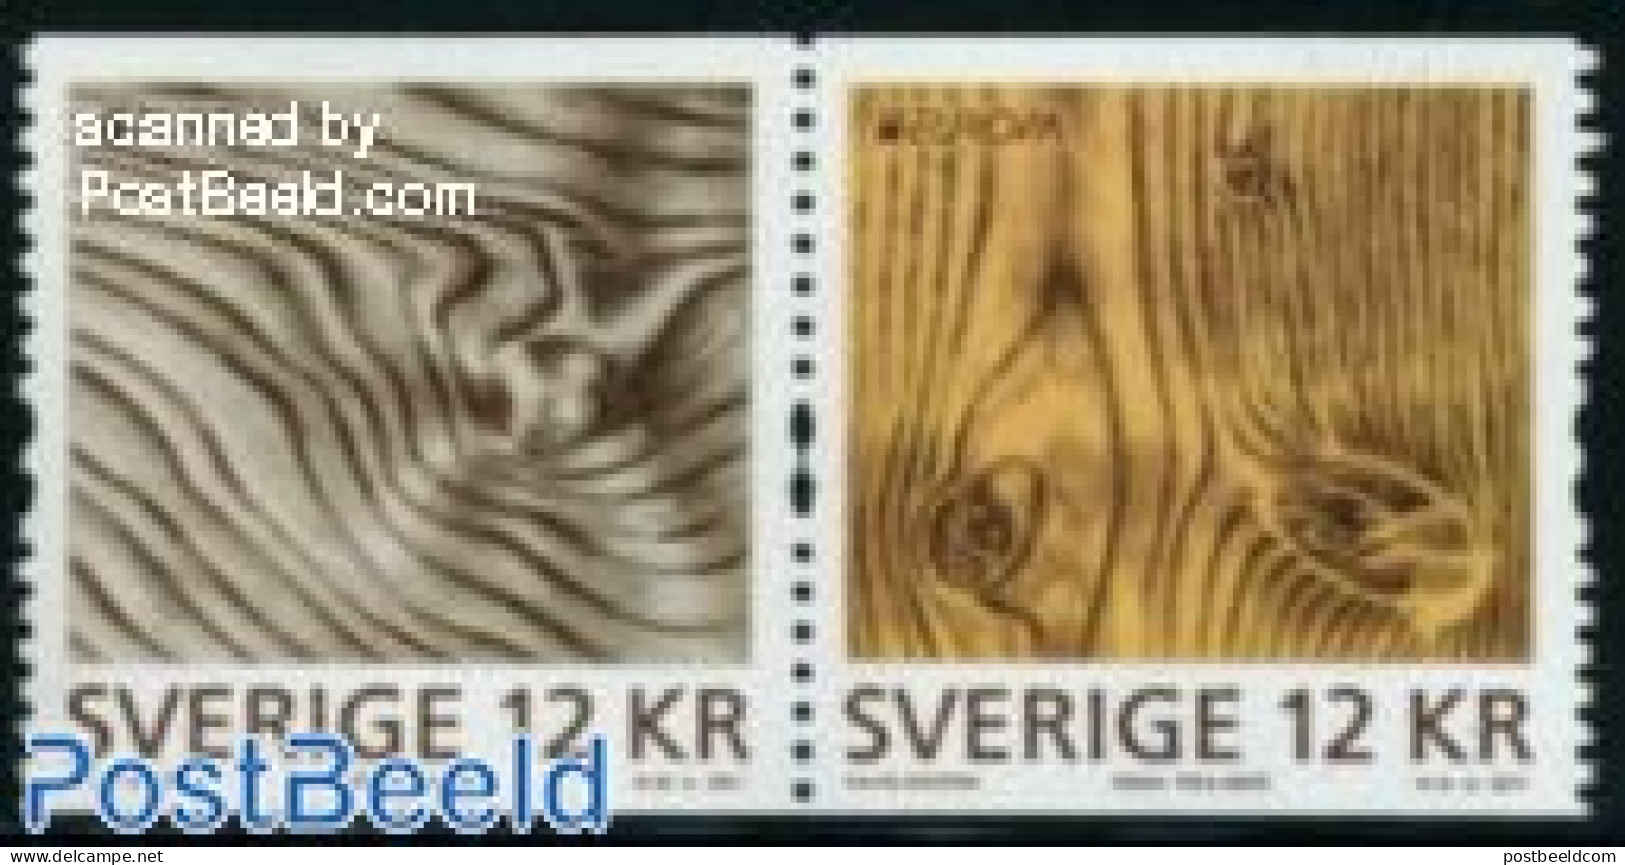 Sweden 2011 Europa, Forests 2v [:] (sequence May Vary), Mint NH, History - Nature - Europa (cept) - Trees & Forests - Unused Stamps